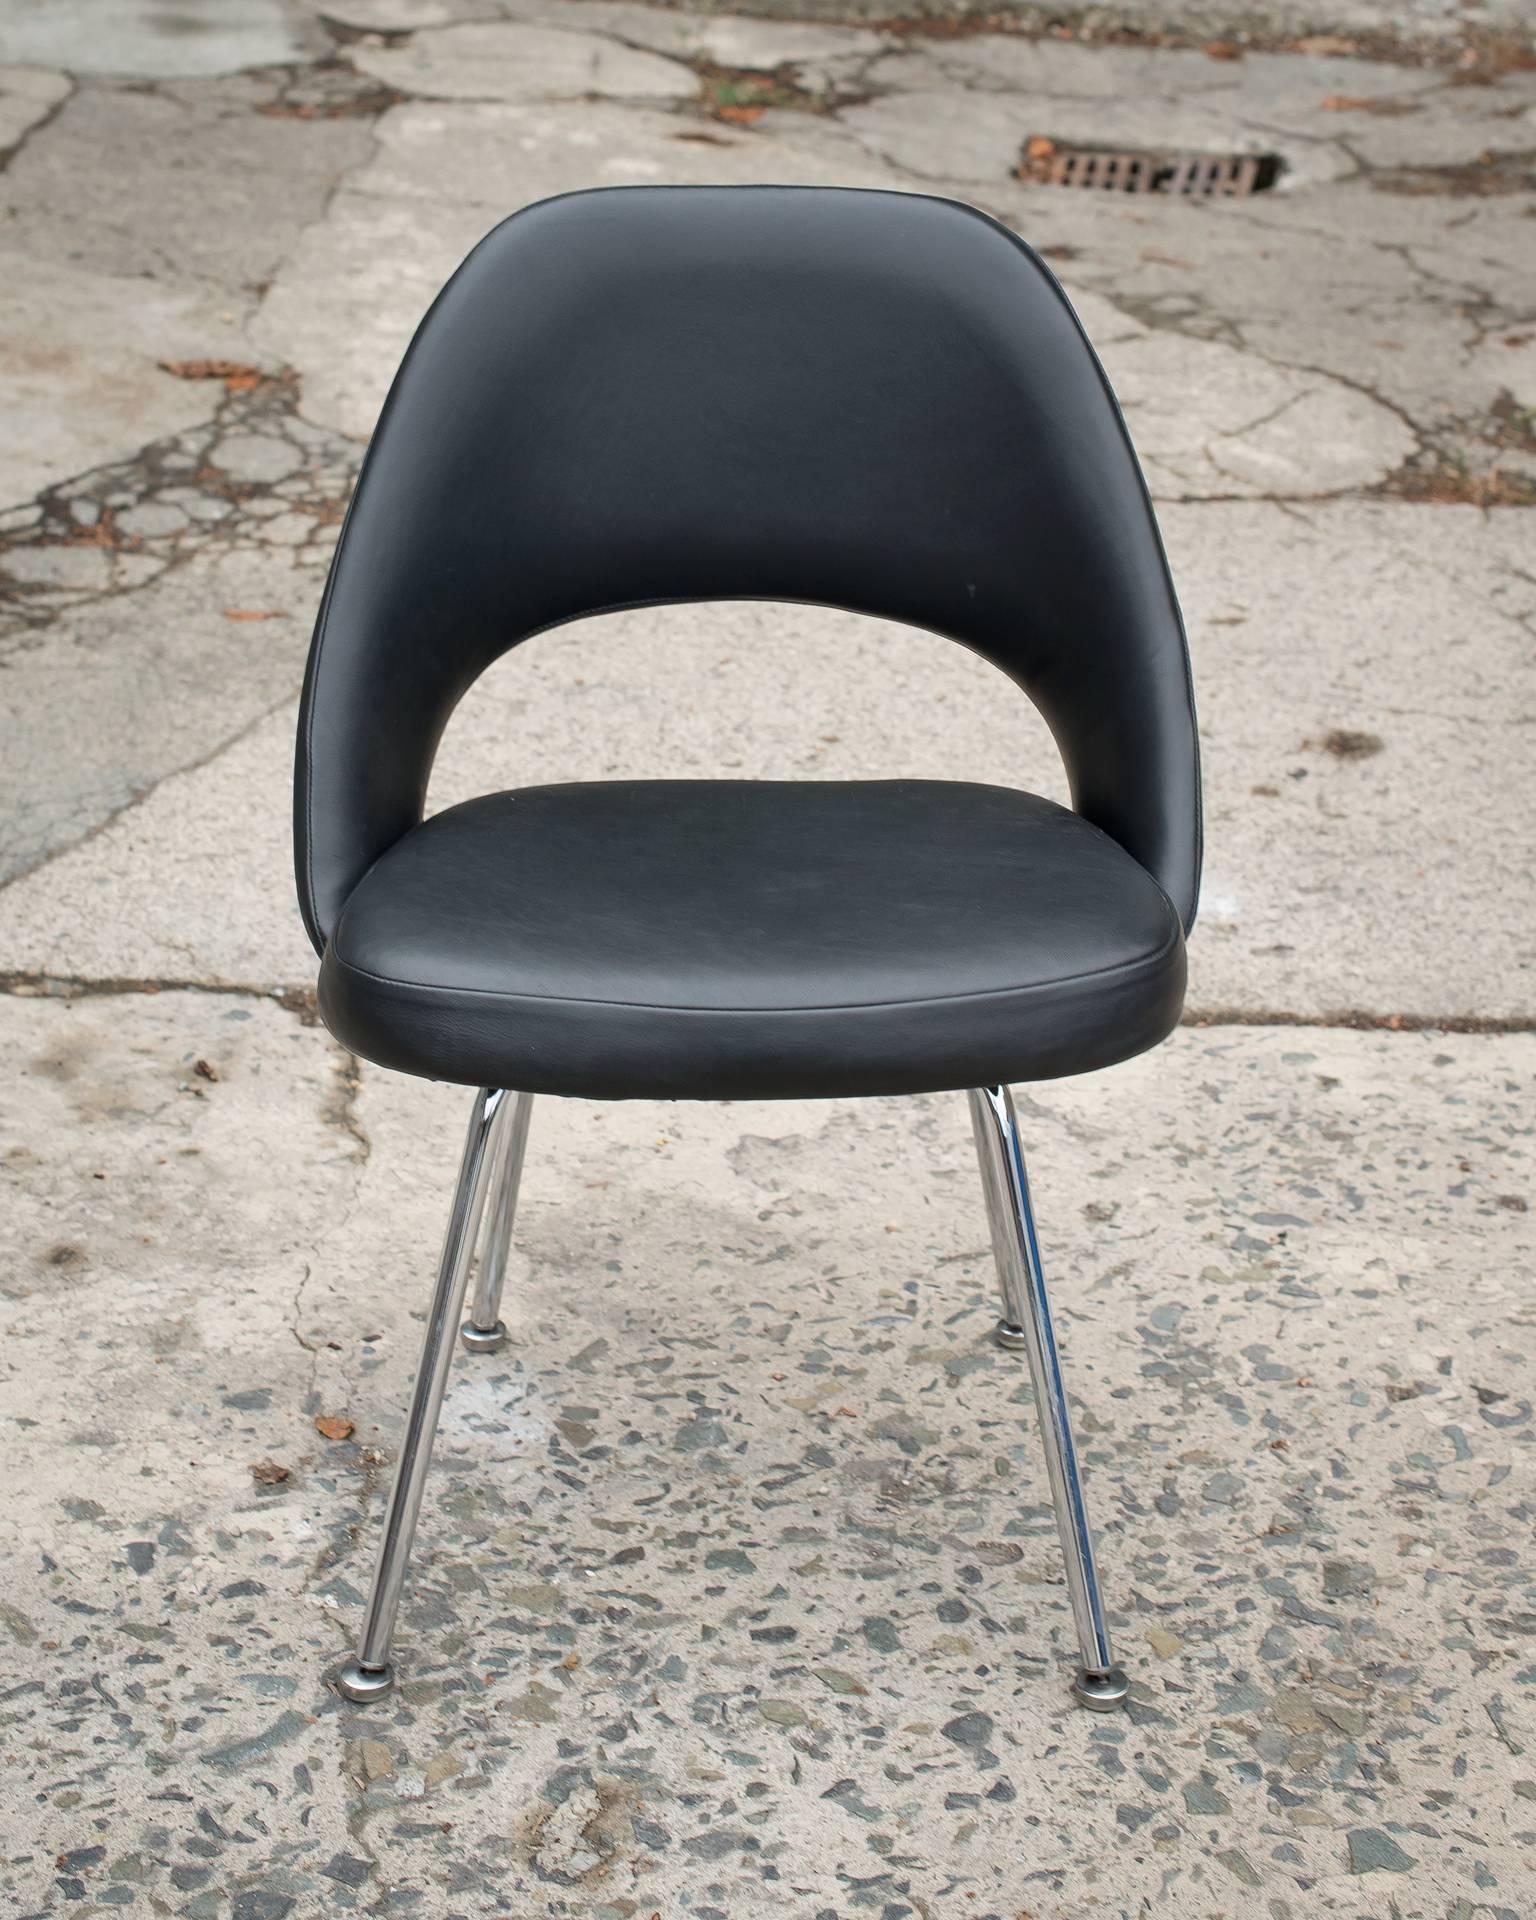 Vintage Eero Saarinen executive side chair designed for Knoll in 1946.
Recovered in top grade black leather with correct hand stitching see detail shots.
Vintage example offers less splayed, more elegant front legs. Puzzling splay of current